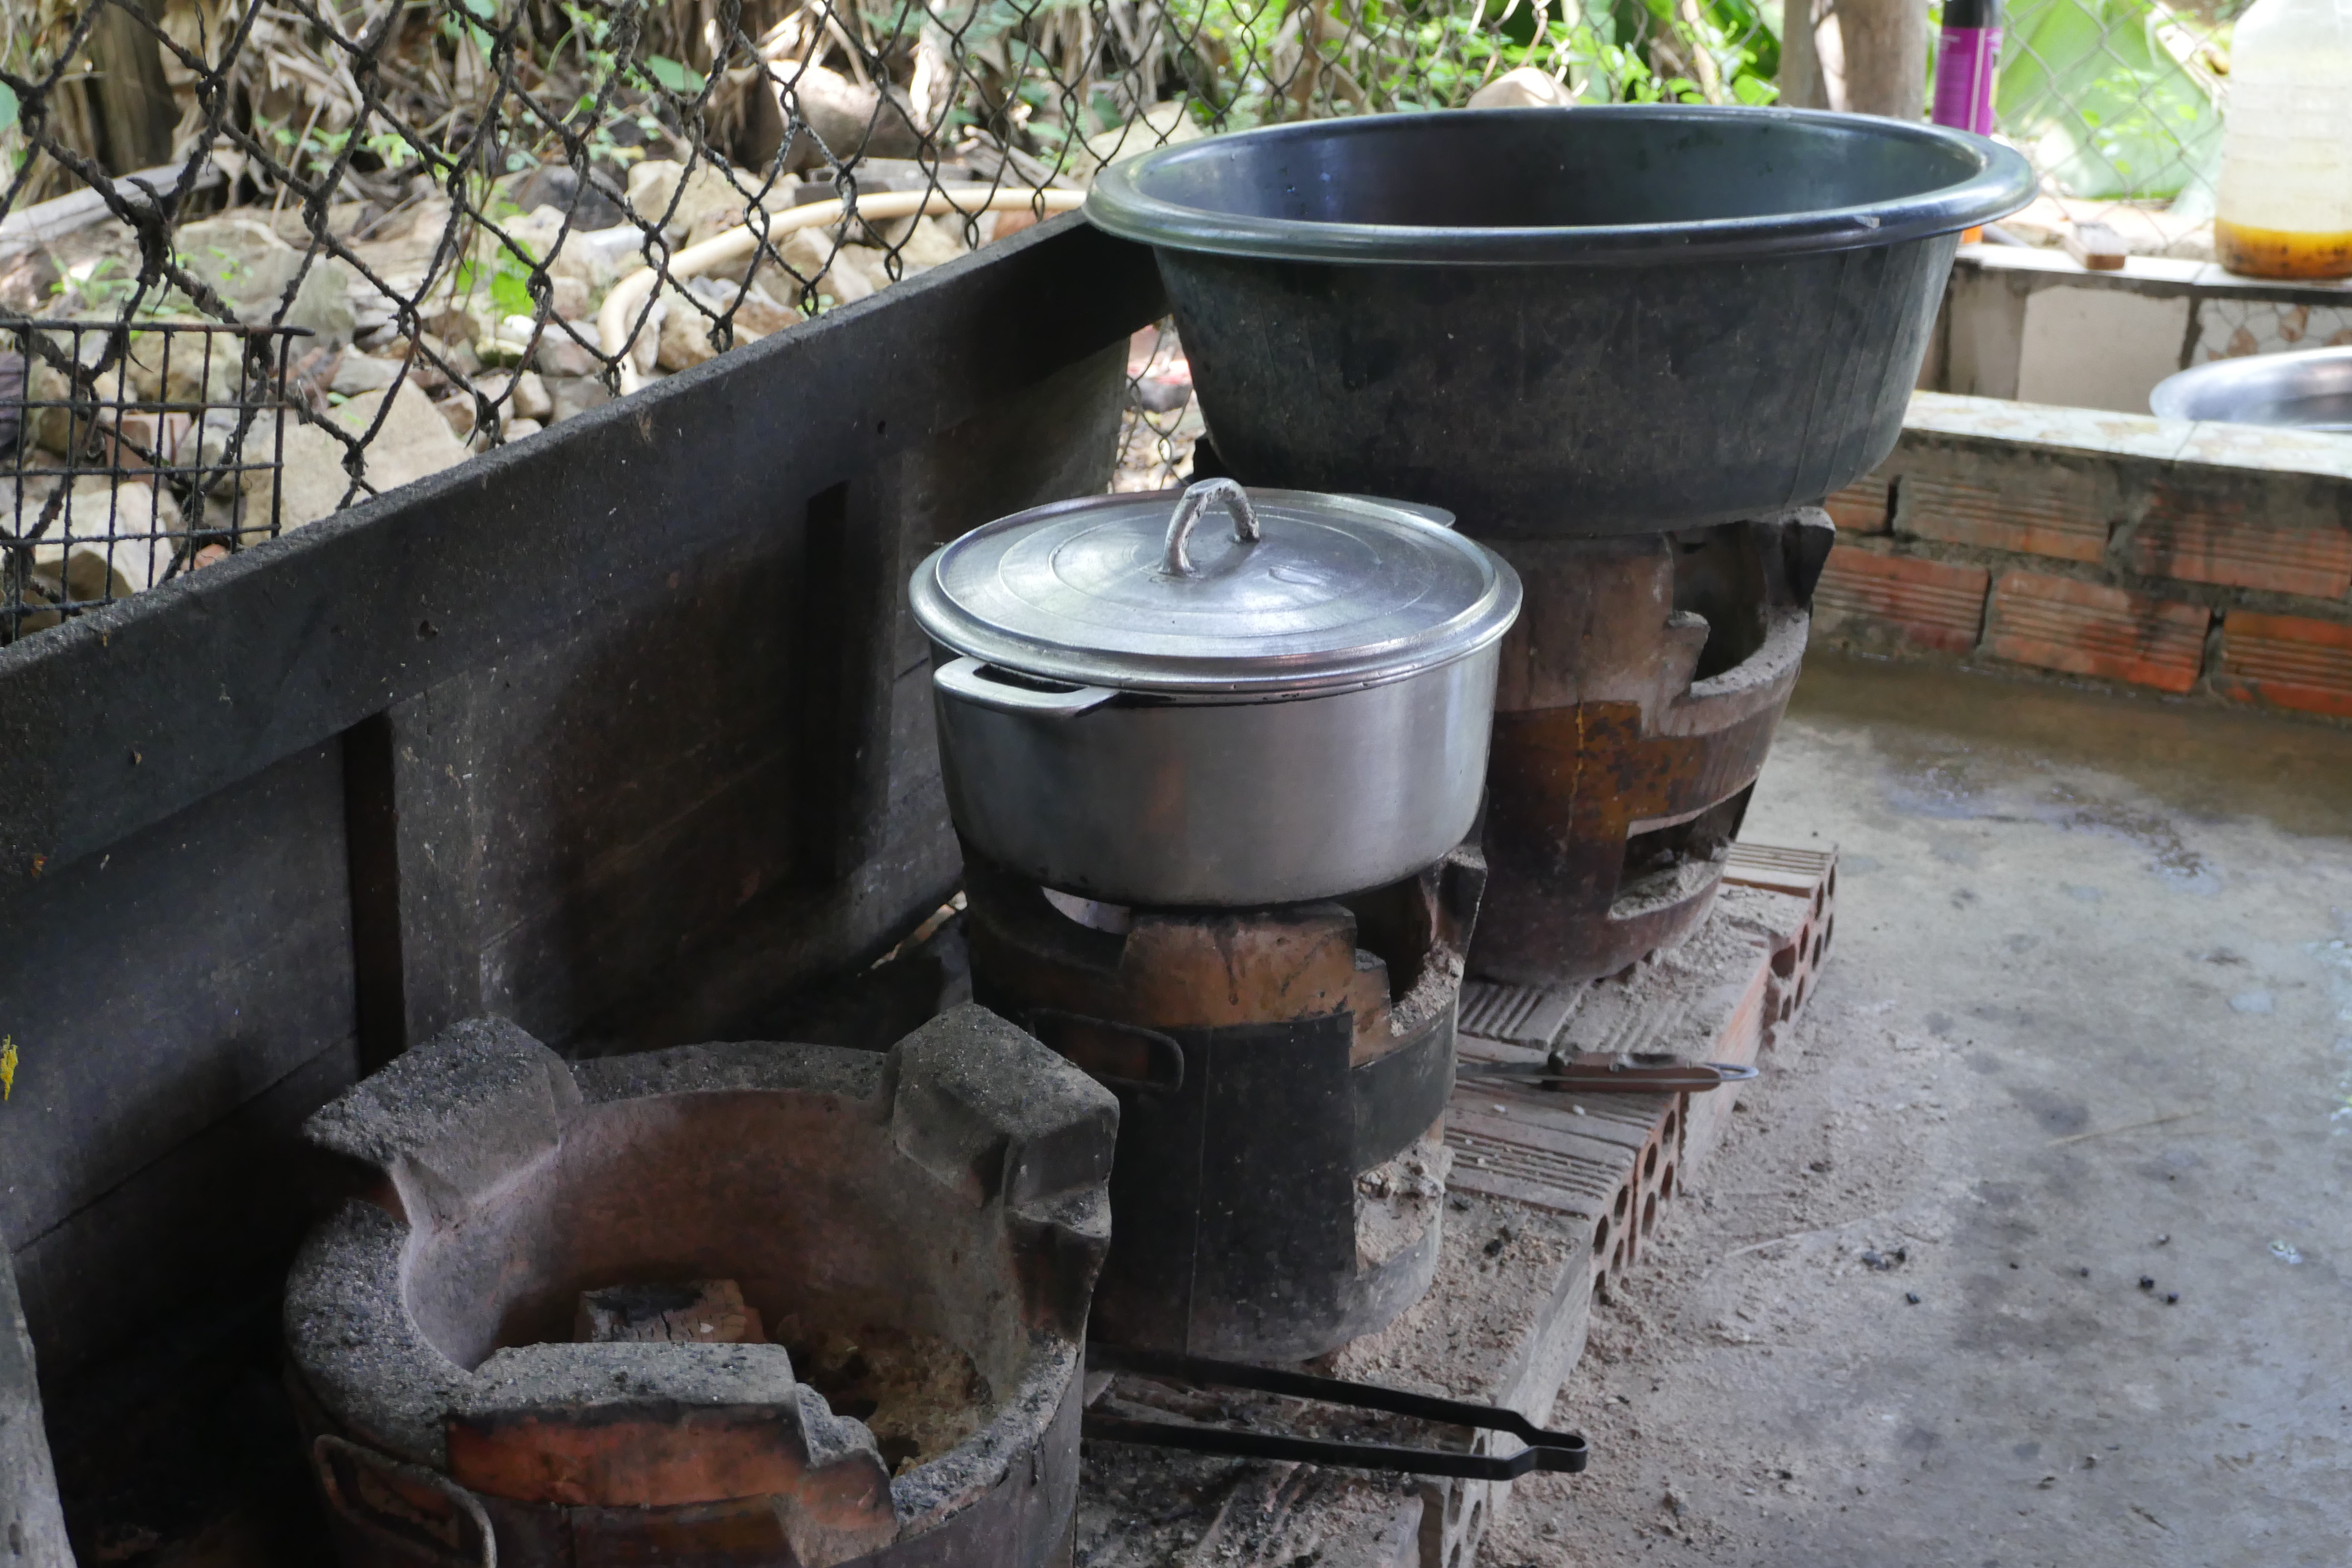 The Khmer way of cooking